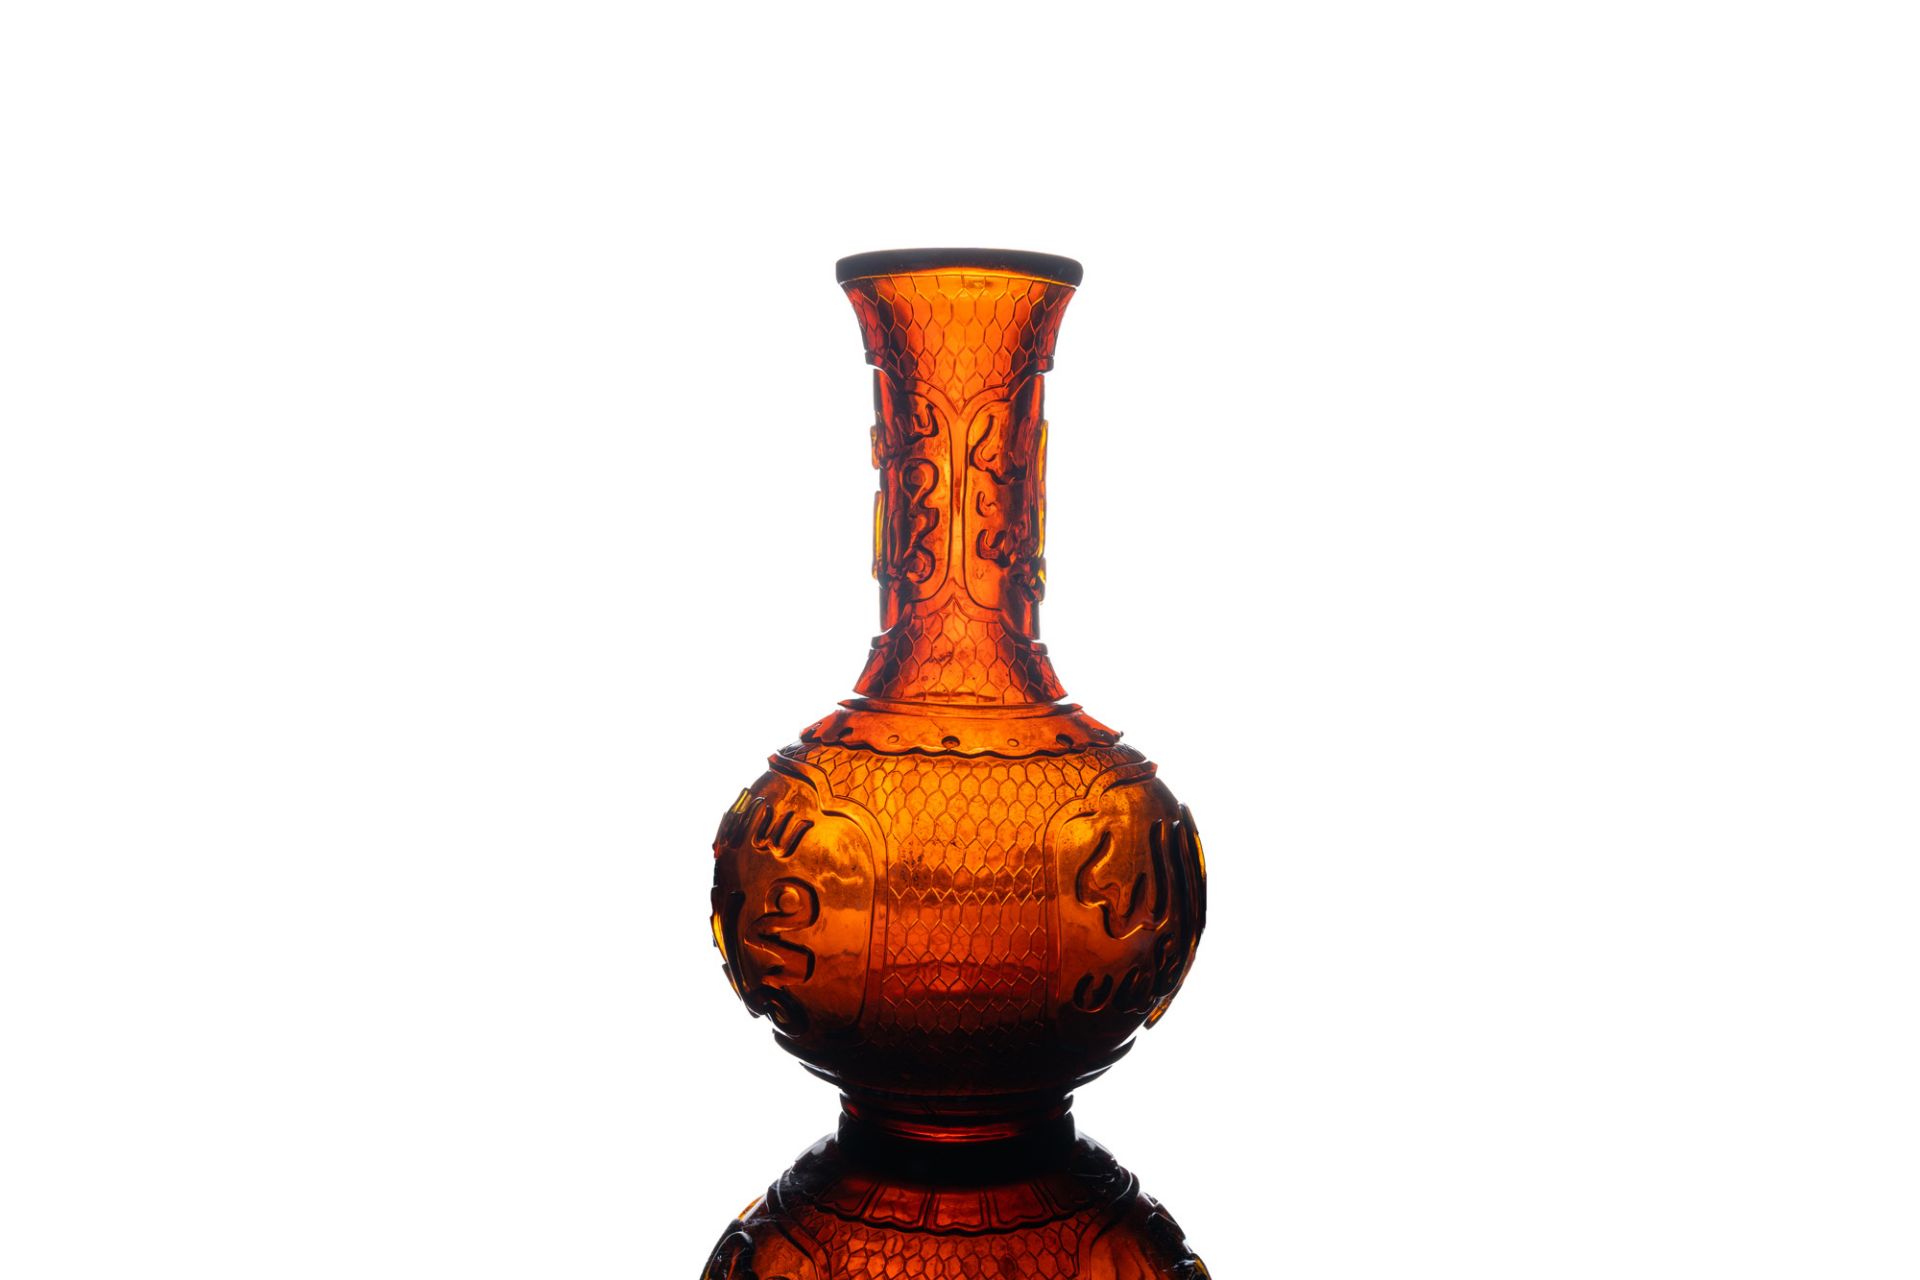 A Chinese Islamic market Beijing glass vase inscribed 'Allah' and 'Muhammad the Prophet', 18/19th C. - Image 2 of 10